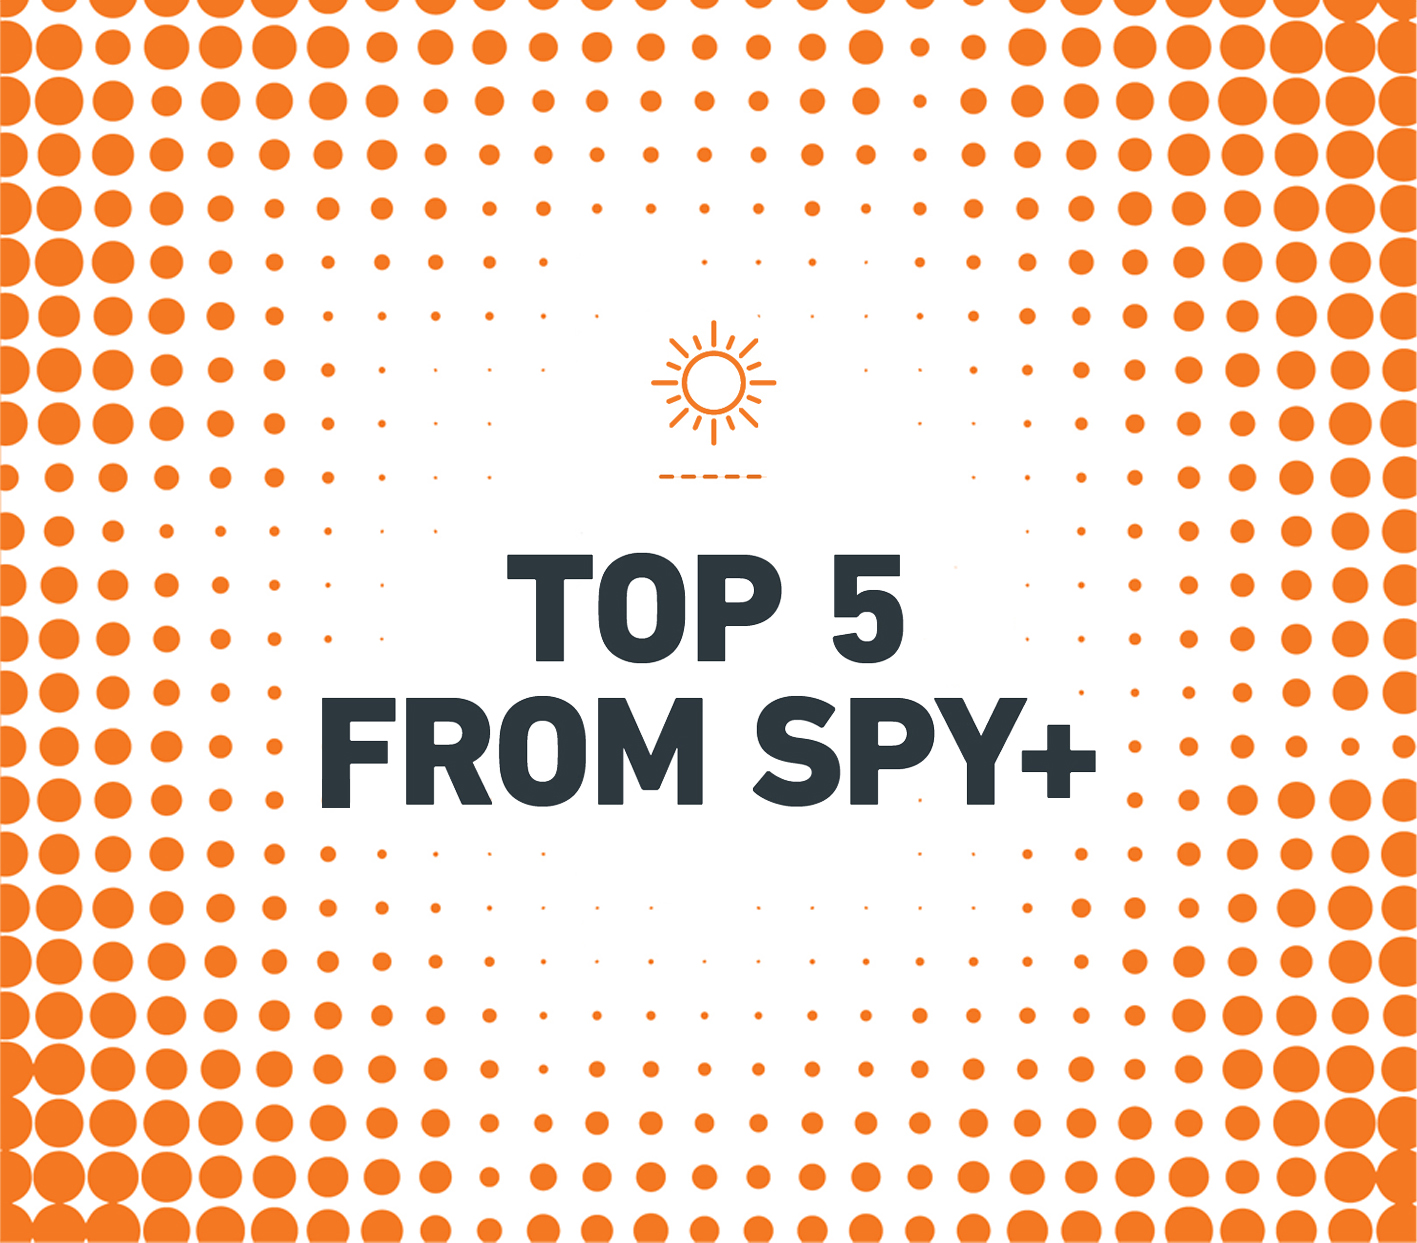 TOP 5 FROM SPY+